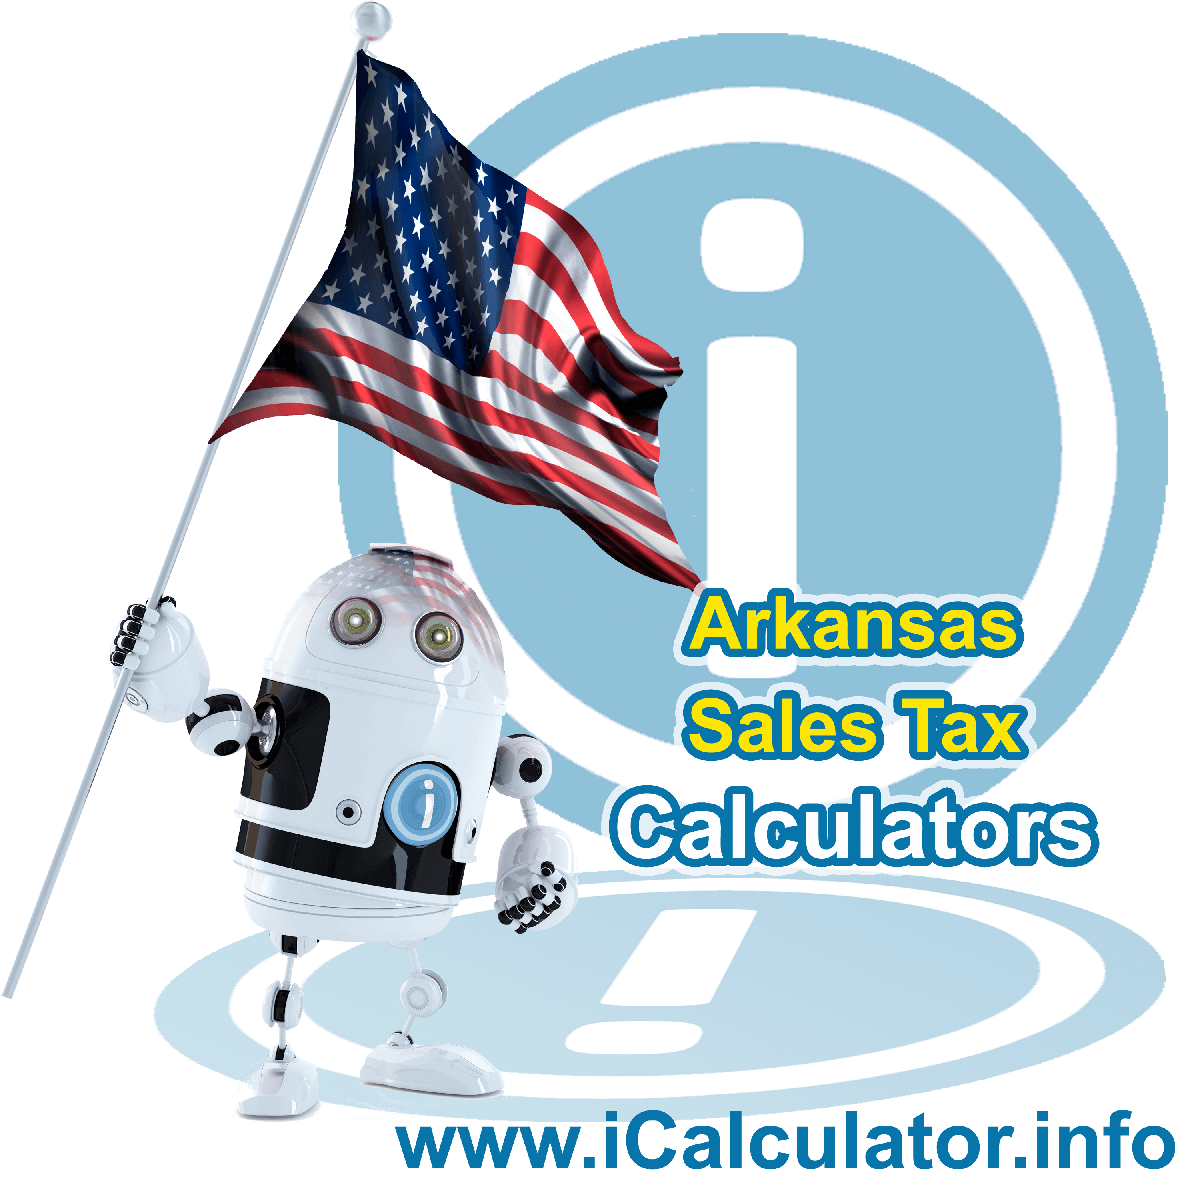 Corning Sales Rates: This image illustrates a calculator robot calculating Corning sales tax manually using the Corning Sales Tax Formula. You can use this information to calculate Corning Sales Tax manually or use the Corning Sales Tax Calculator to calculate sales tax online.